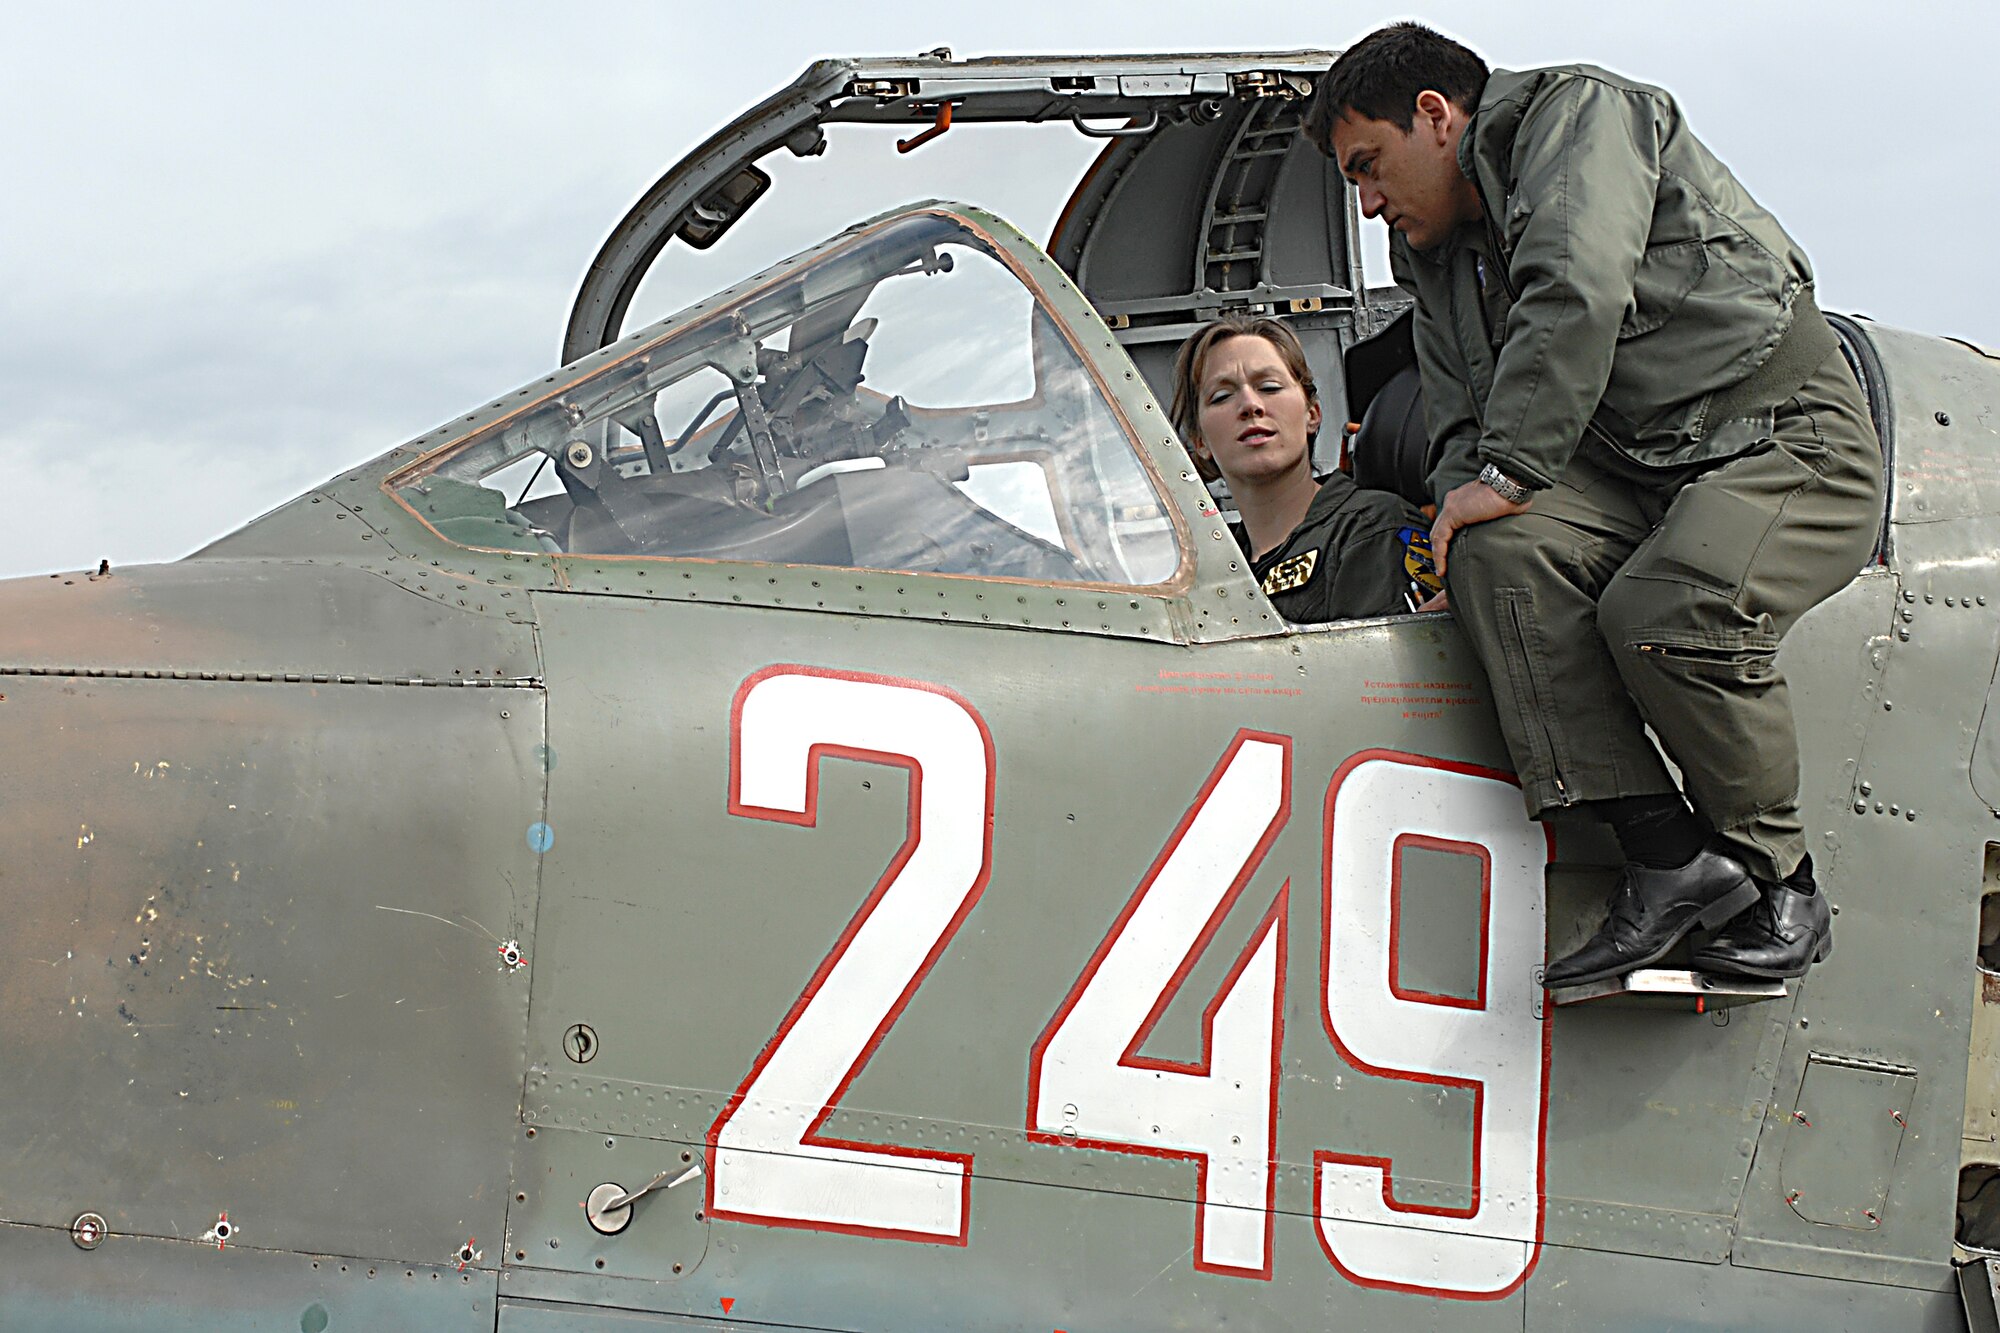 Capt. Vladislav Todorov, a Bulgarian SU-25 pilot, explains the SU-25 cockpit April 15 to Air Force 1st Lt. Priscilla Giddings, an A-10 pilot from the 81st Fighter Squadron. Pilots from Spandahlem Air Base, Germany, and the Bulgarian air force joined together during "Reunion April 2009" to hone their close air support capabilities. (U.S. Air Force photo/Master Sgt. Bill Gomez) 